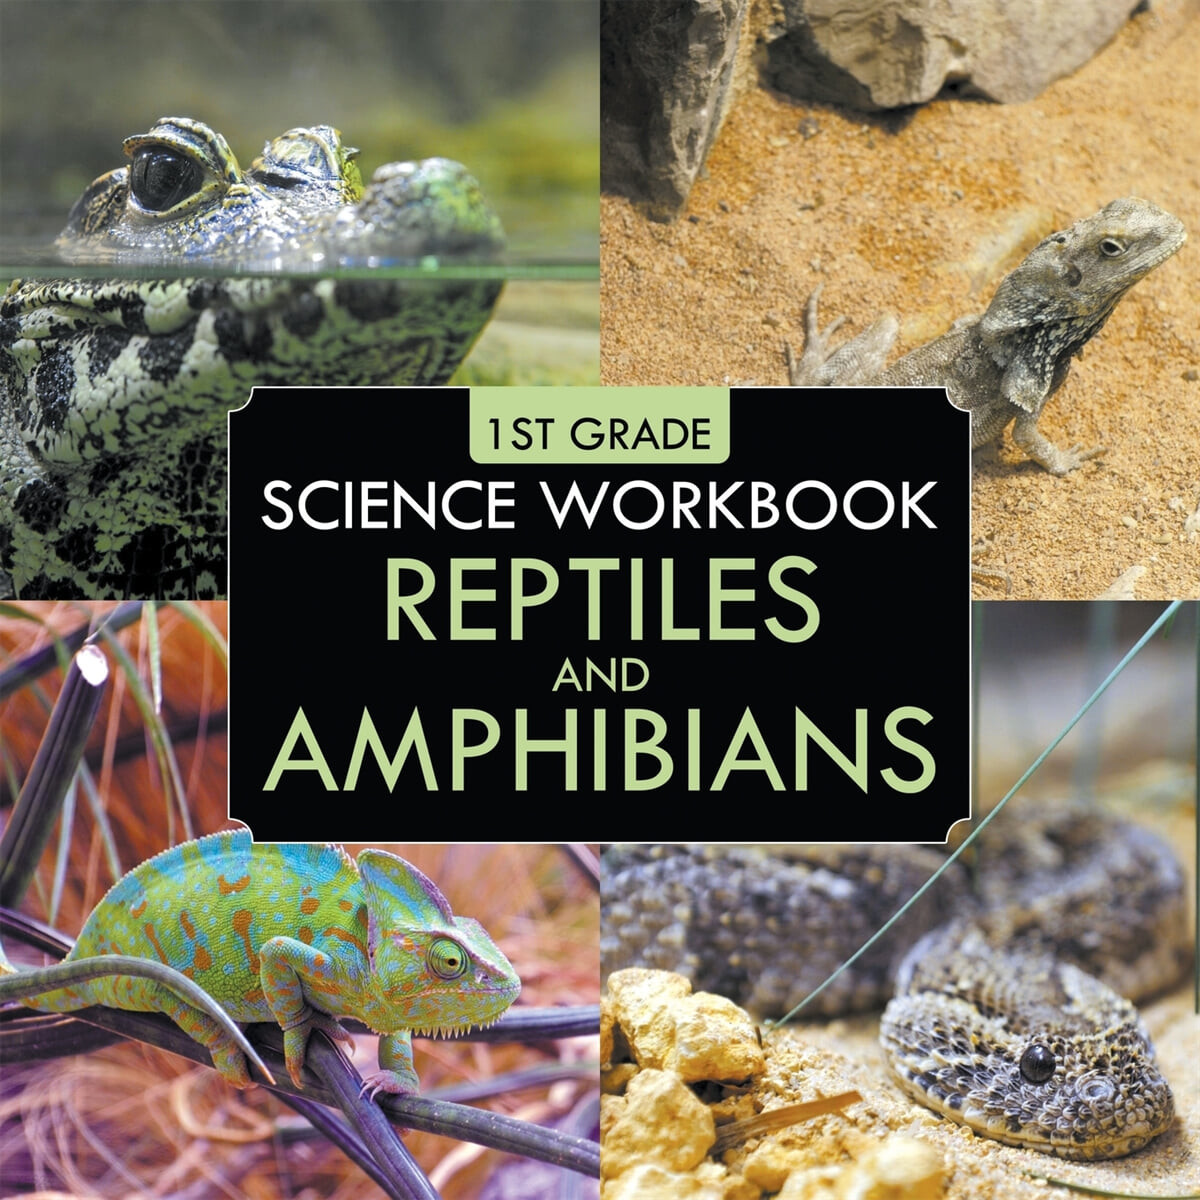 1st Grade Science Workbook (Reptiles and Amphibians)